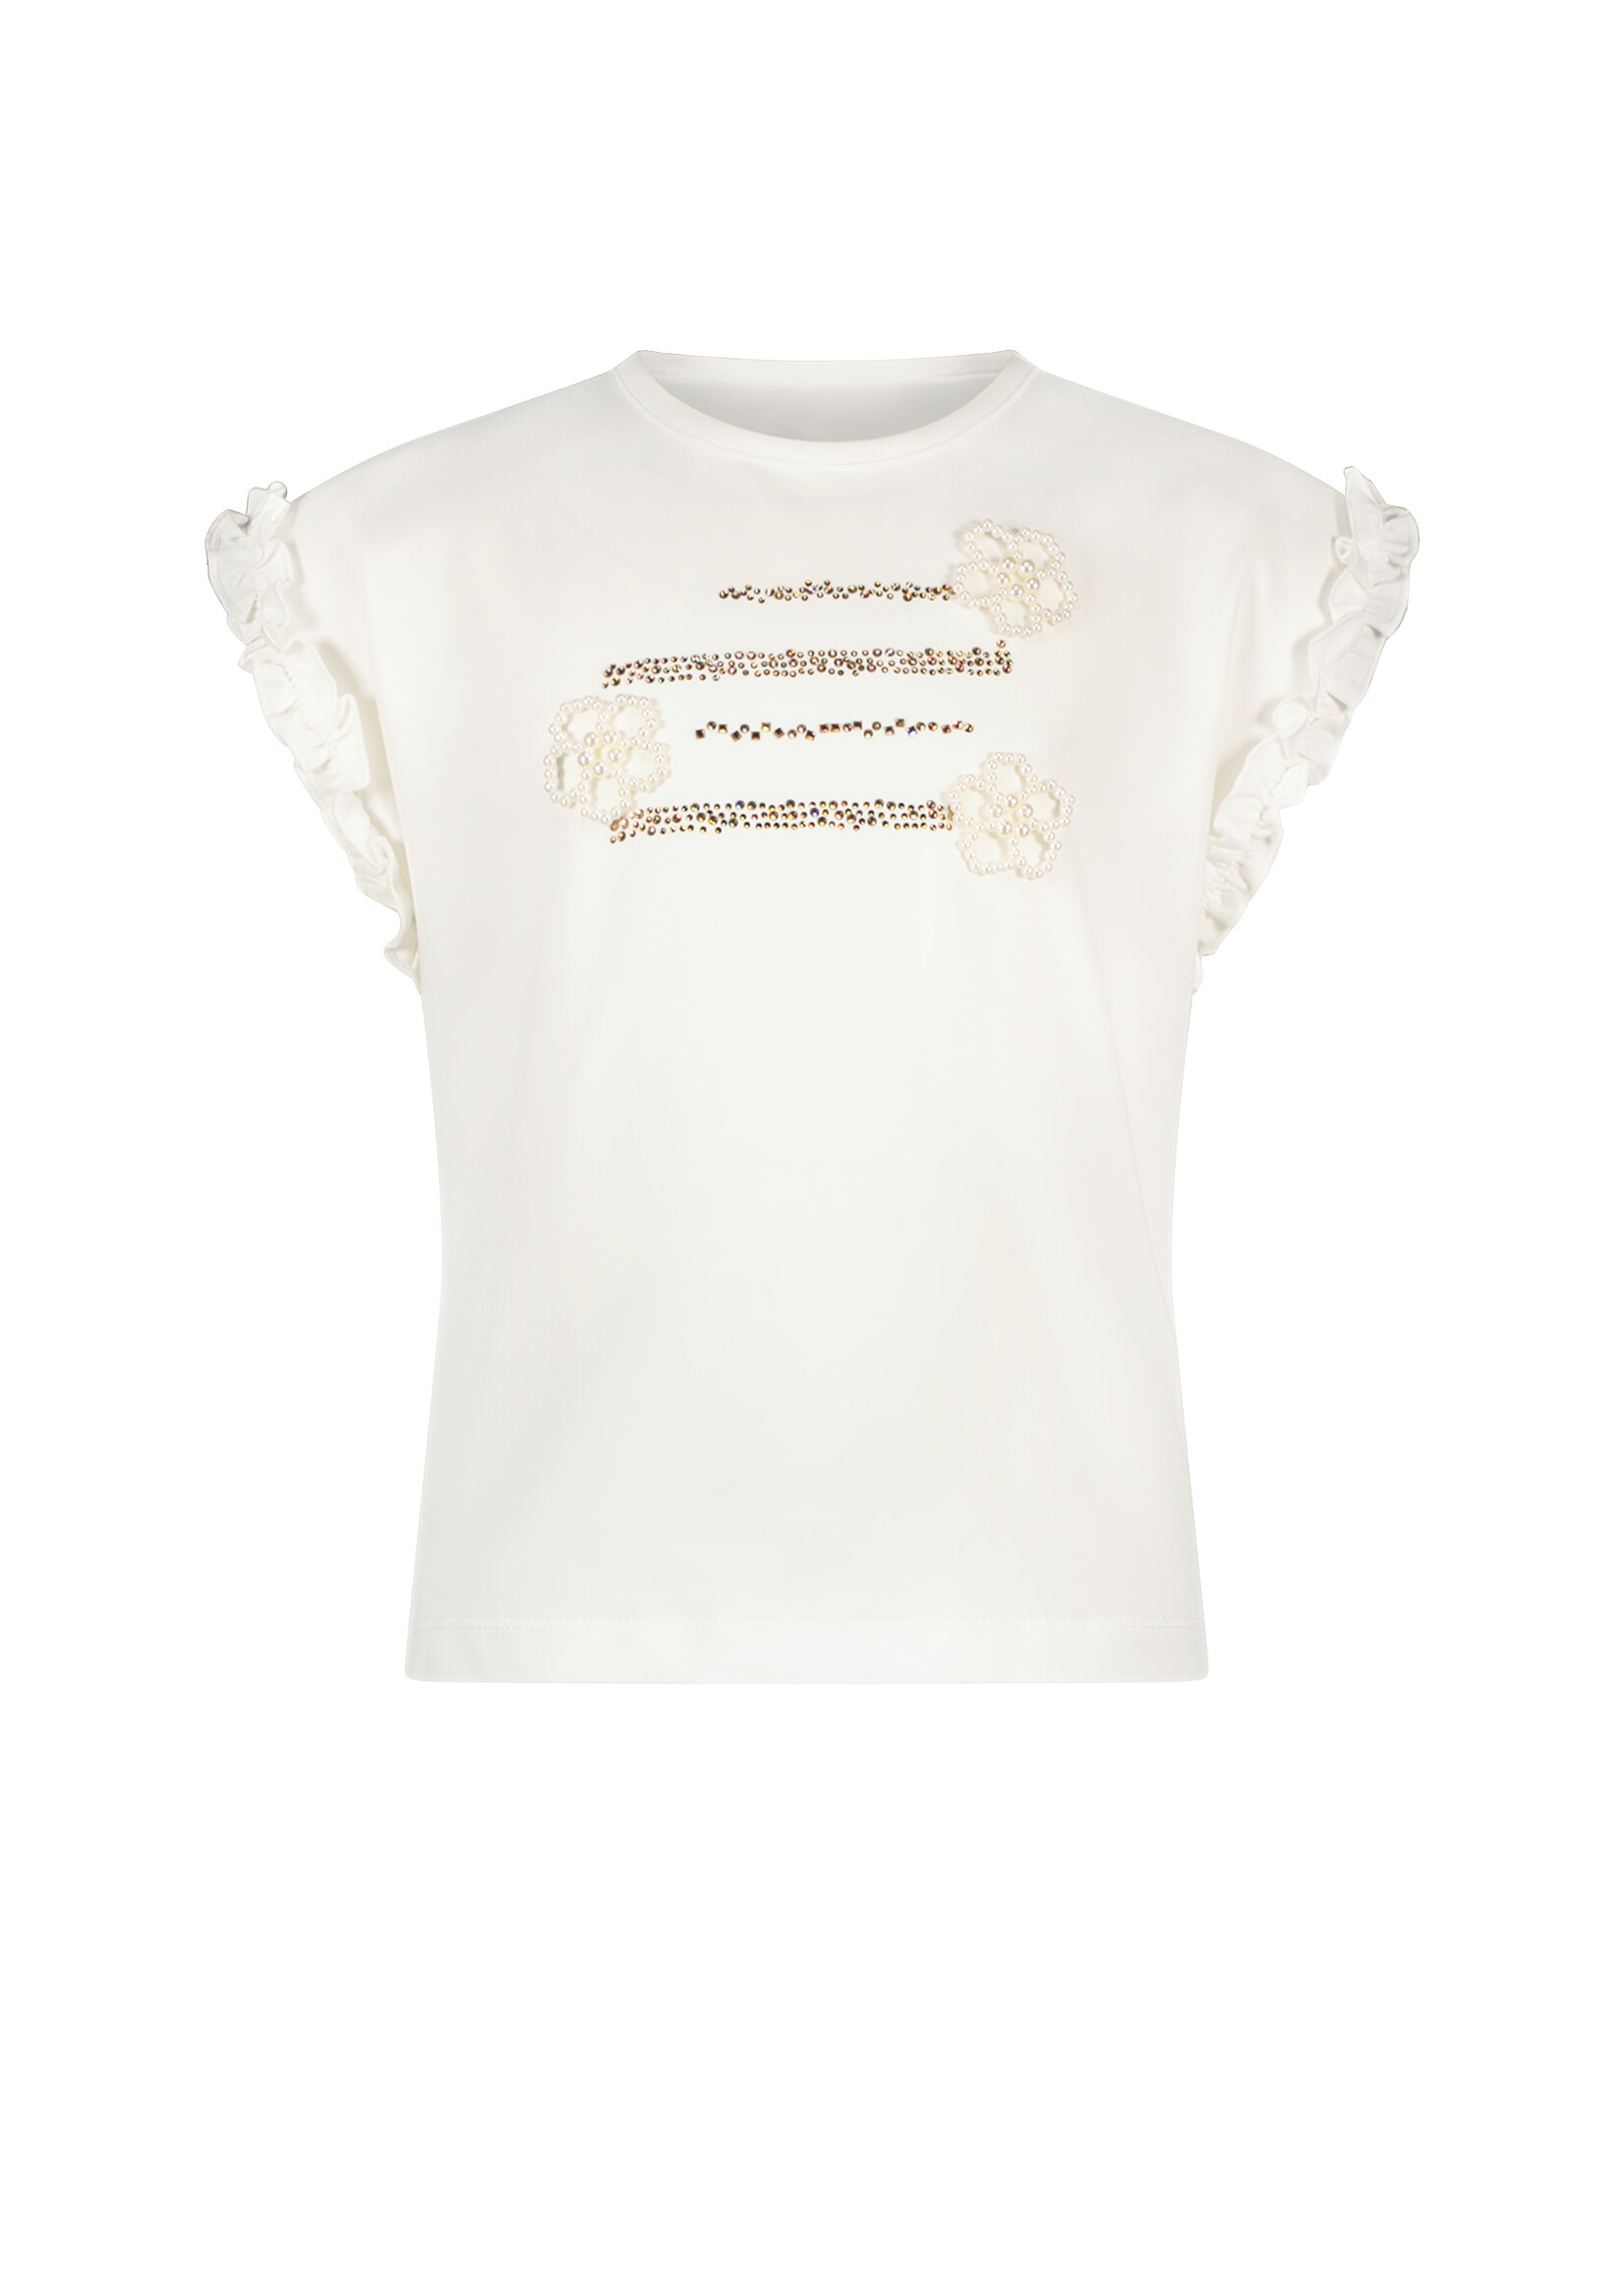 Le Chic Girls Kids C312-5404 NOPALY flowers & lines T-shirt Off White